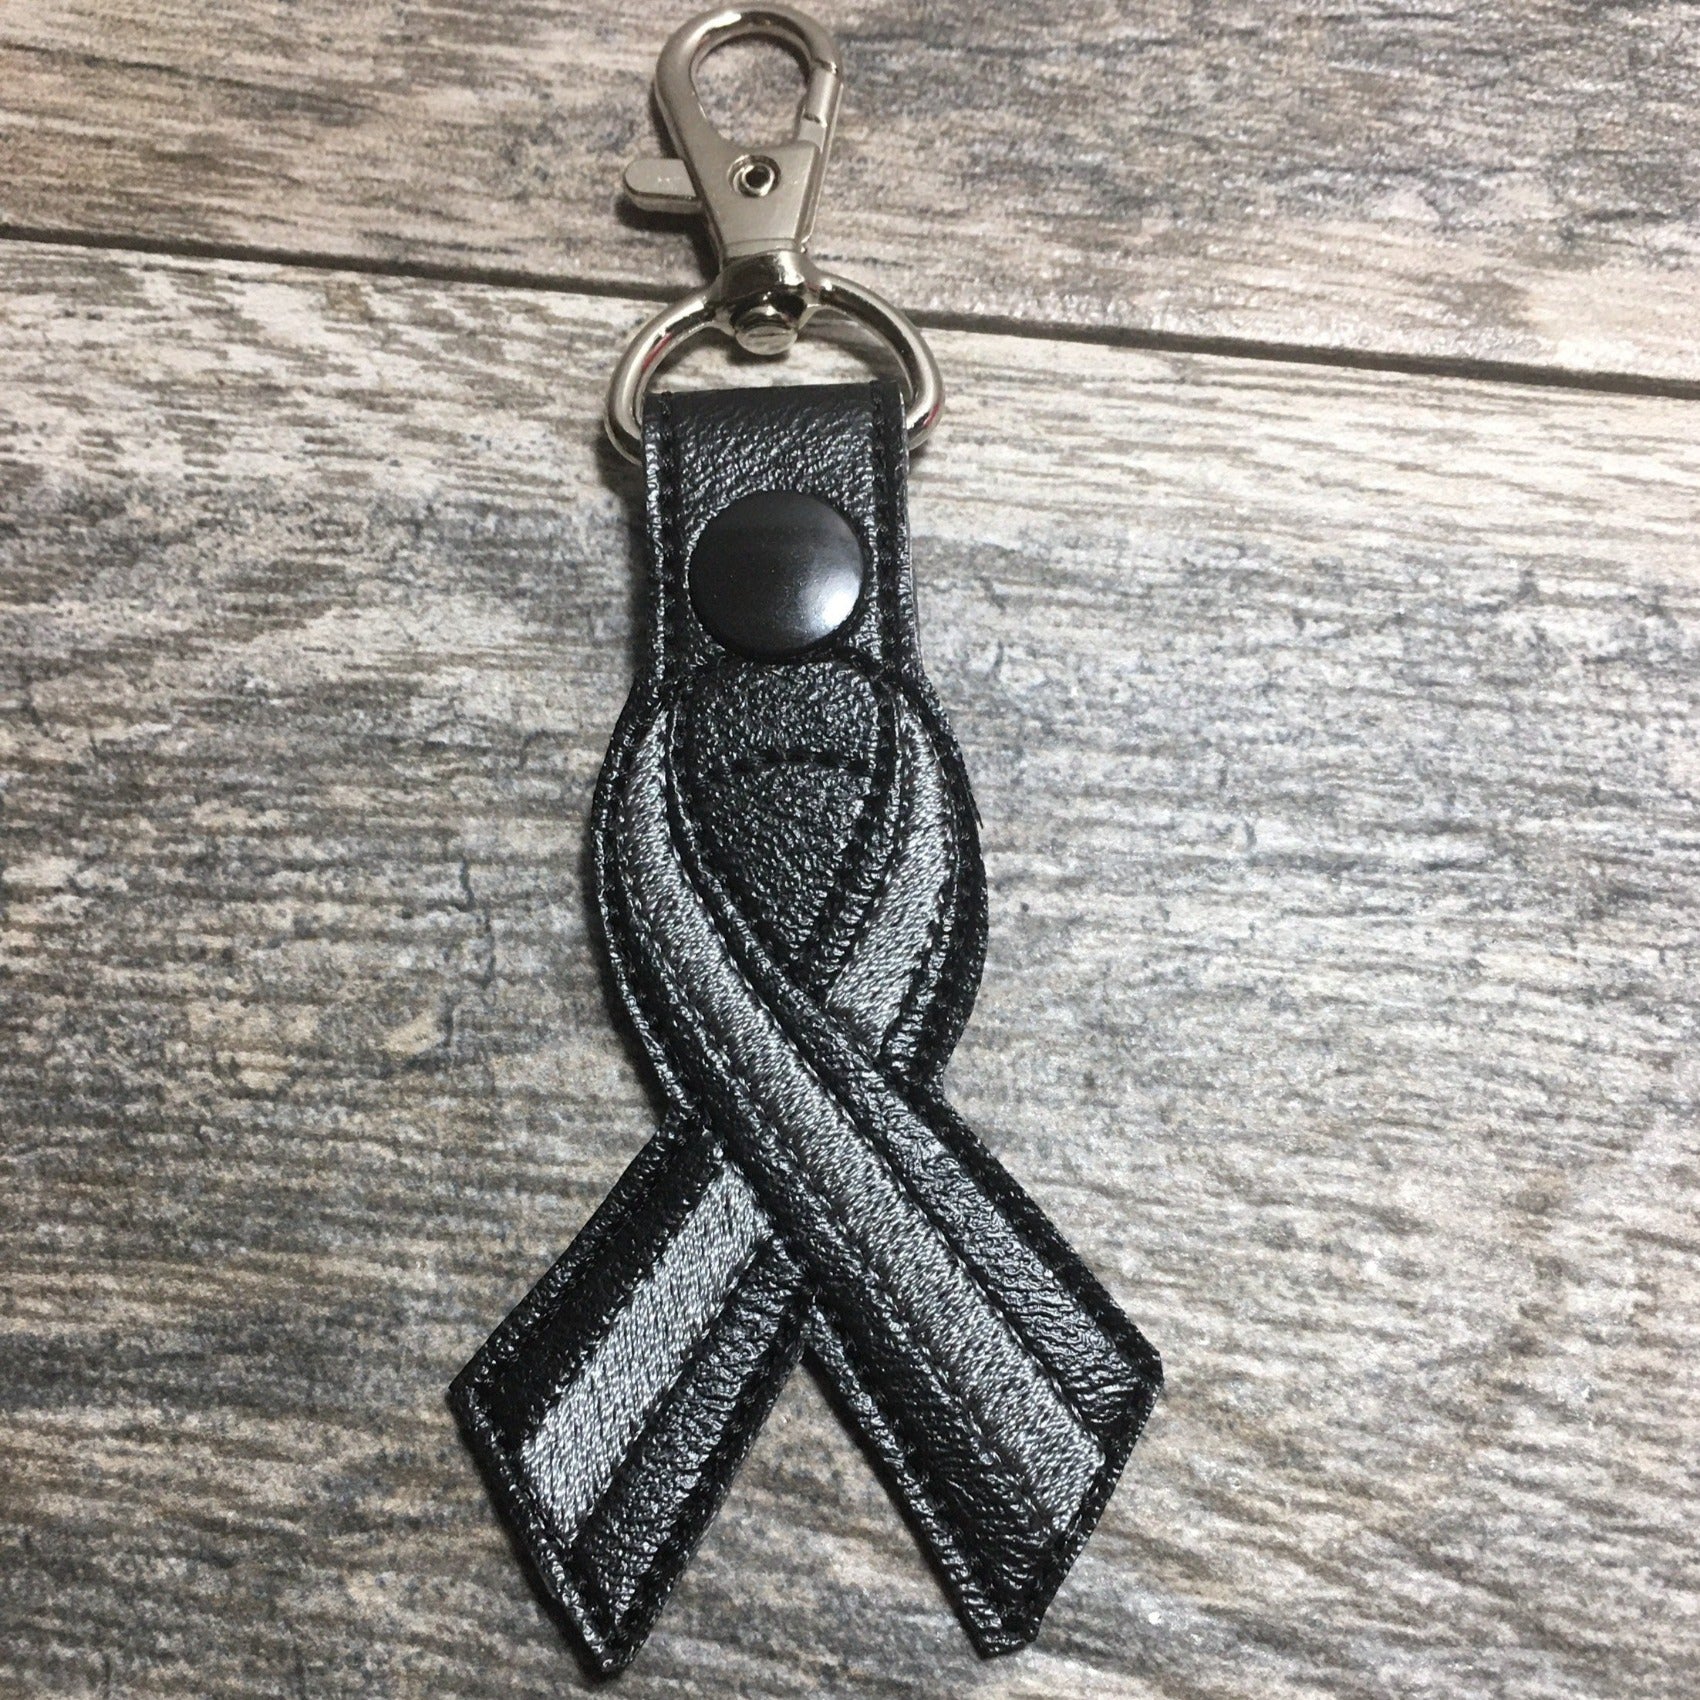 Thin gray line keychain corrections officers